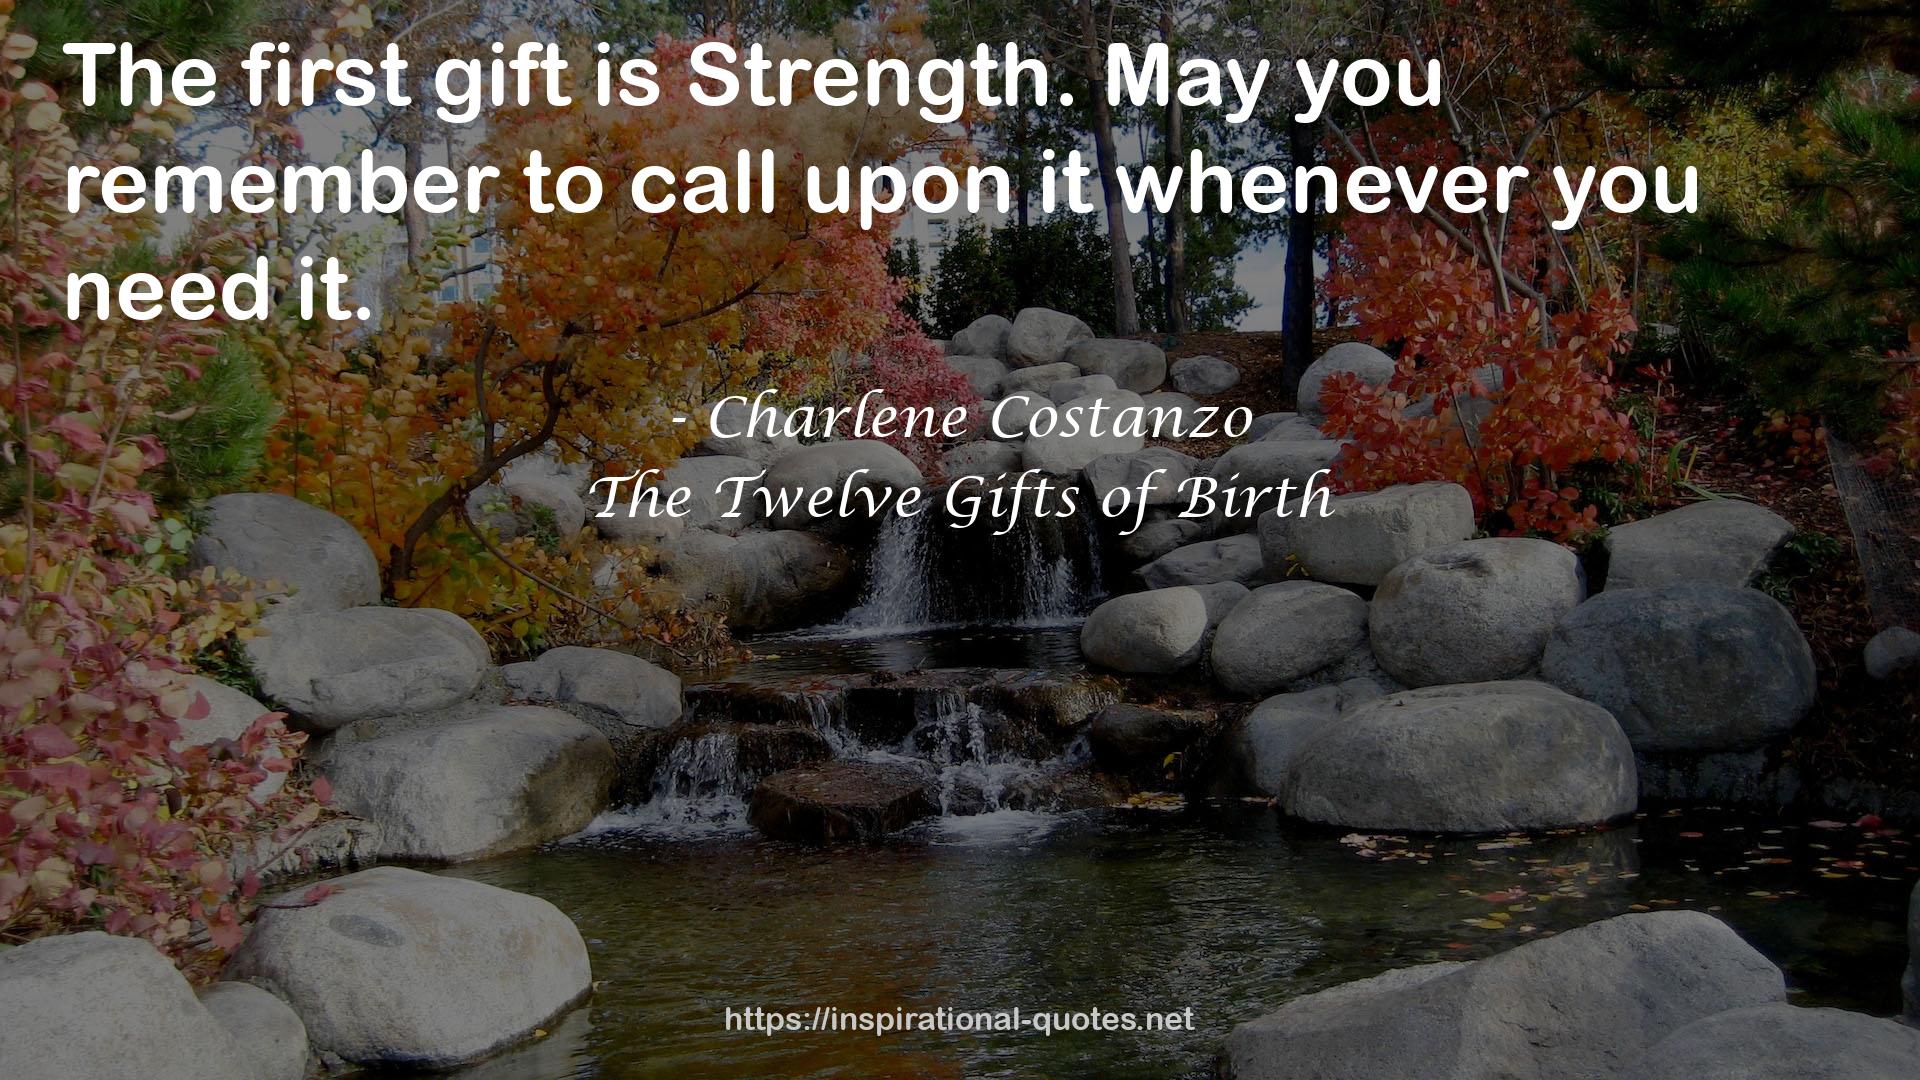 The Twelve Gifts of Birth QUOTES